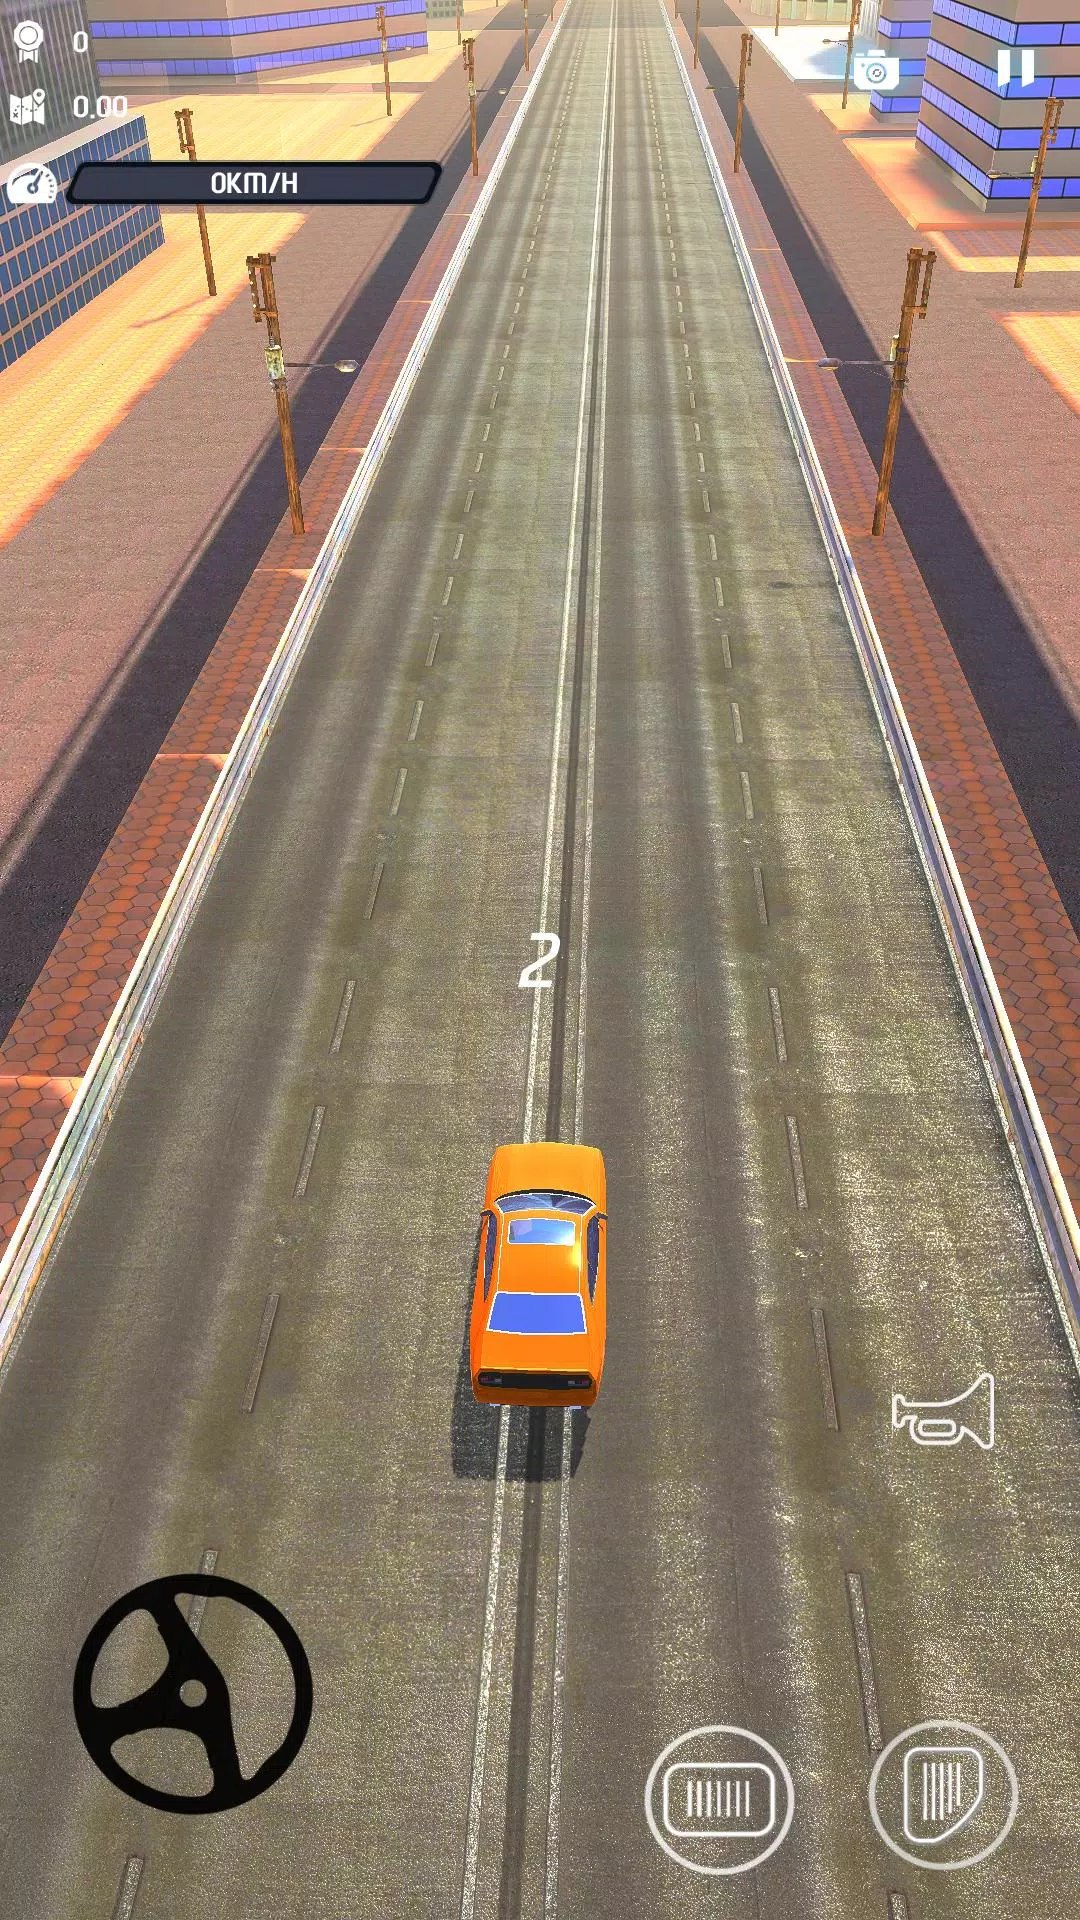 Race Master 3D - Car Racing APK for Android - Download